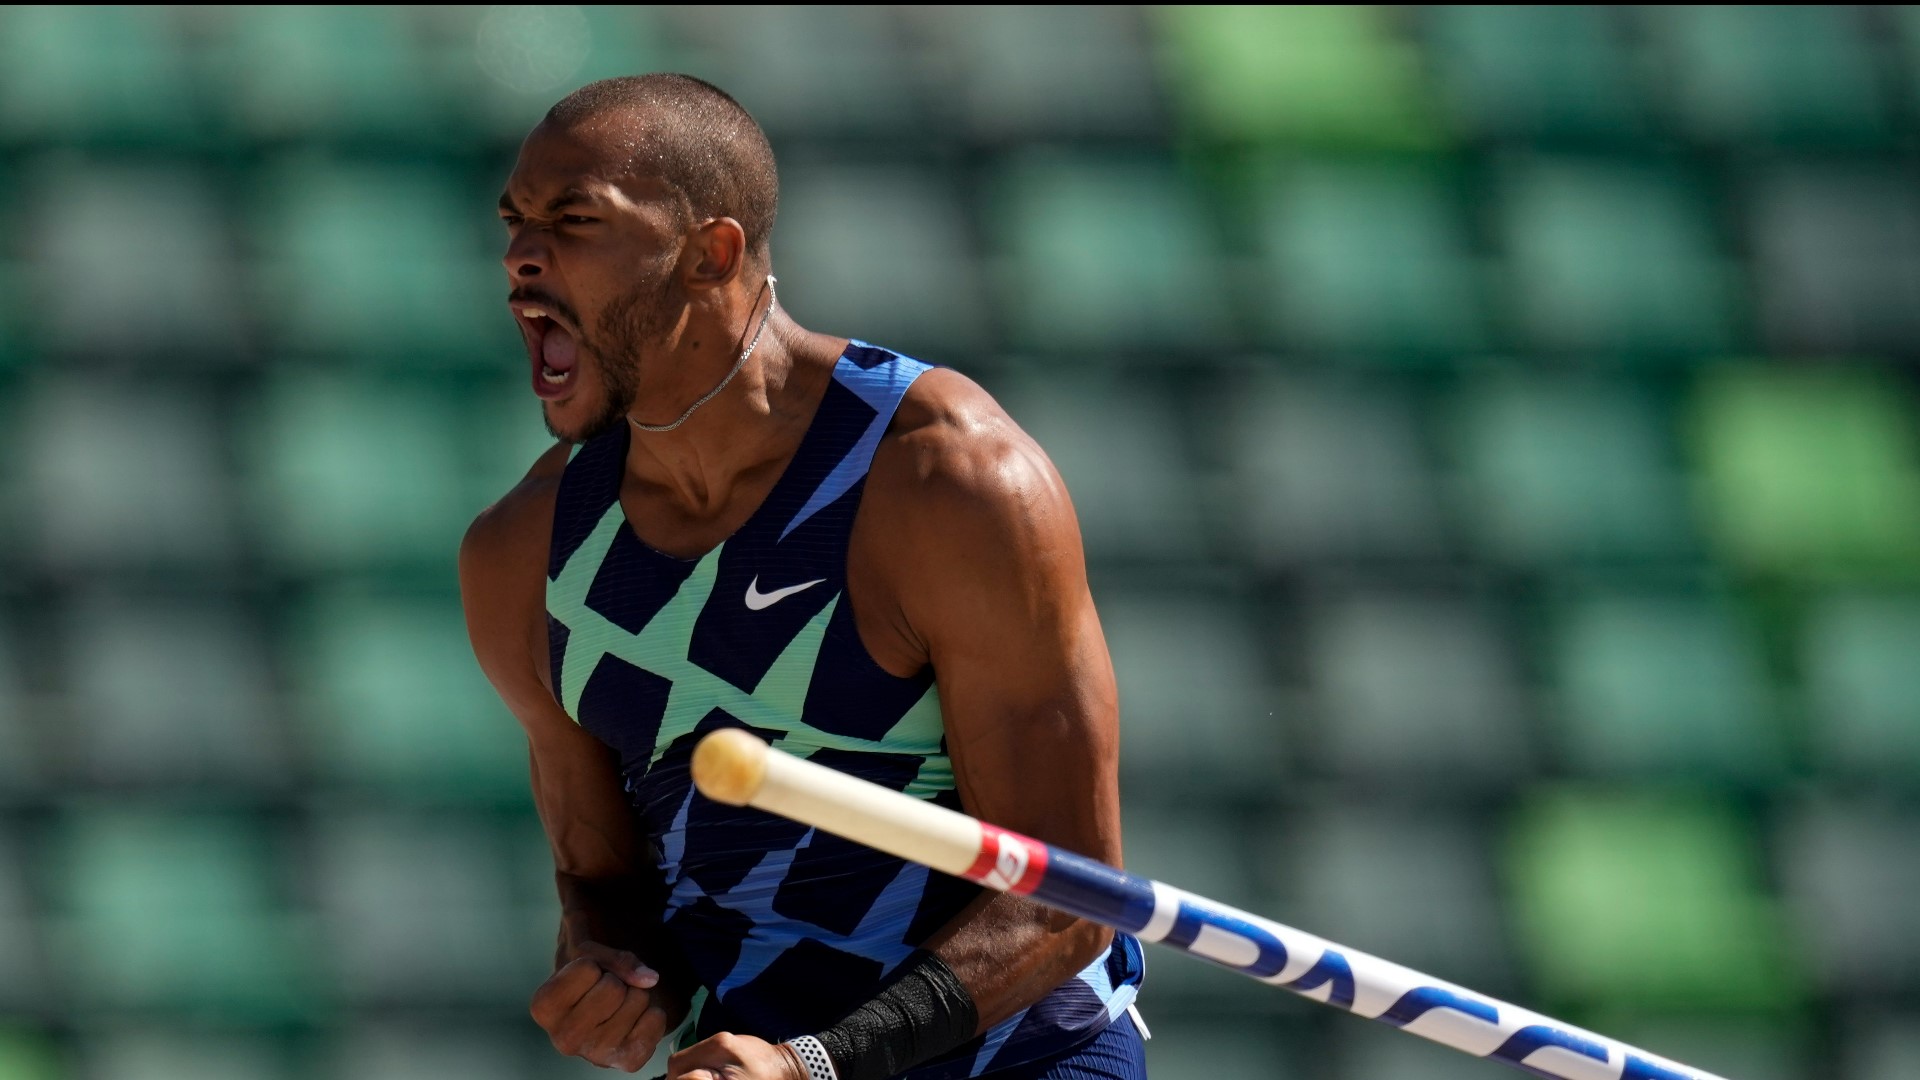 Former UGA Bulldog and Team USA decathlete Garrett Scantling is making his Olympic debut in Tokyo, just two years after quitting his corporate finance job.